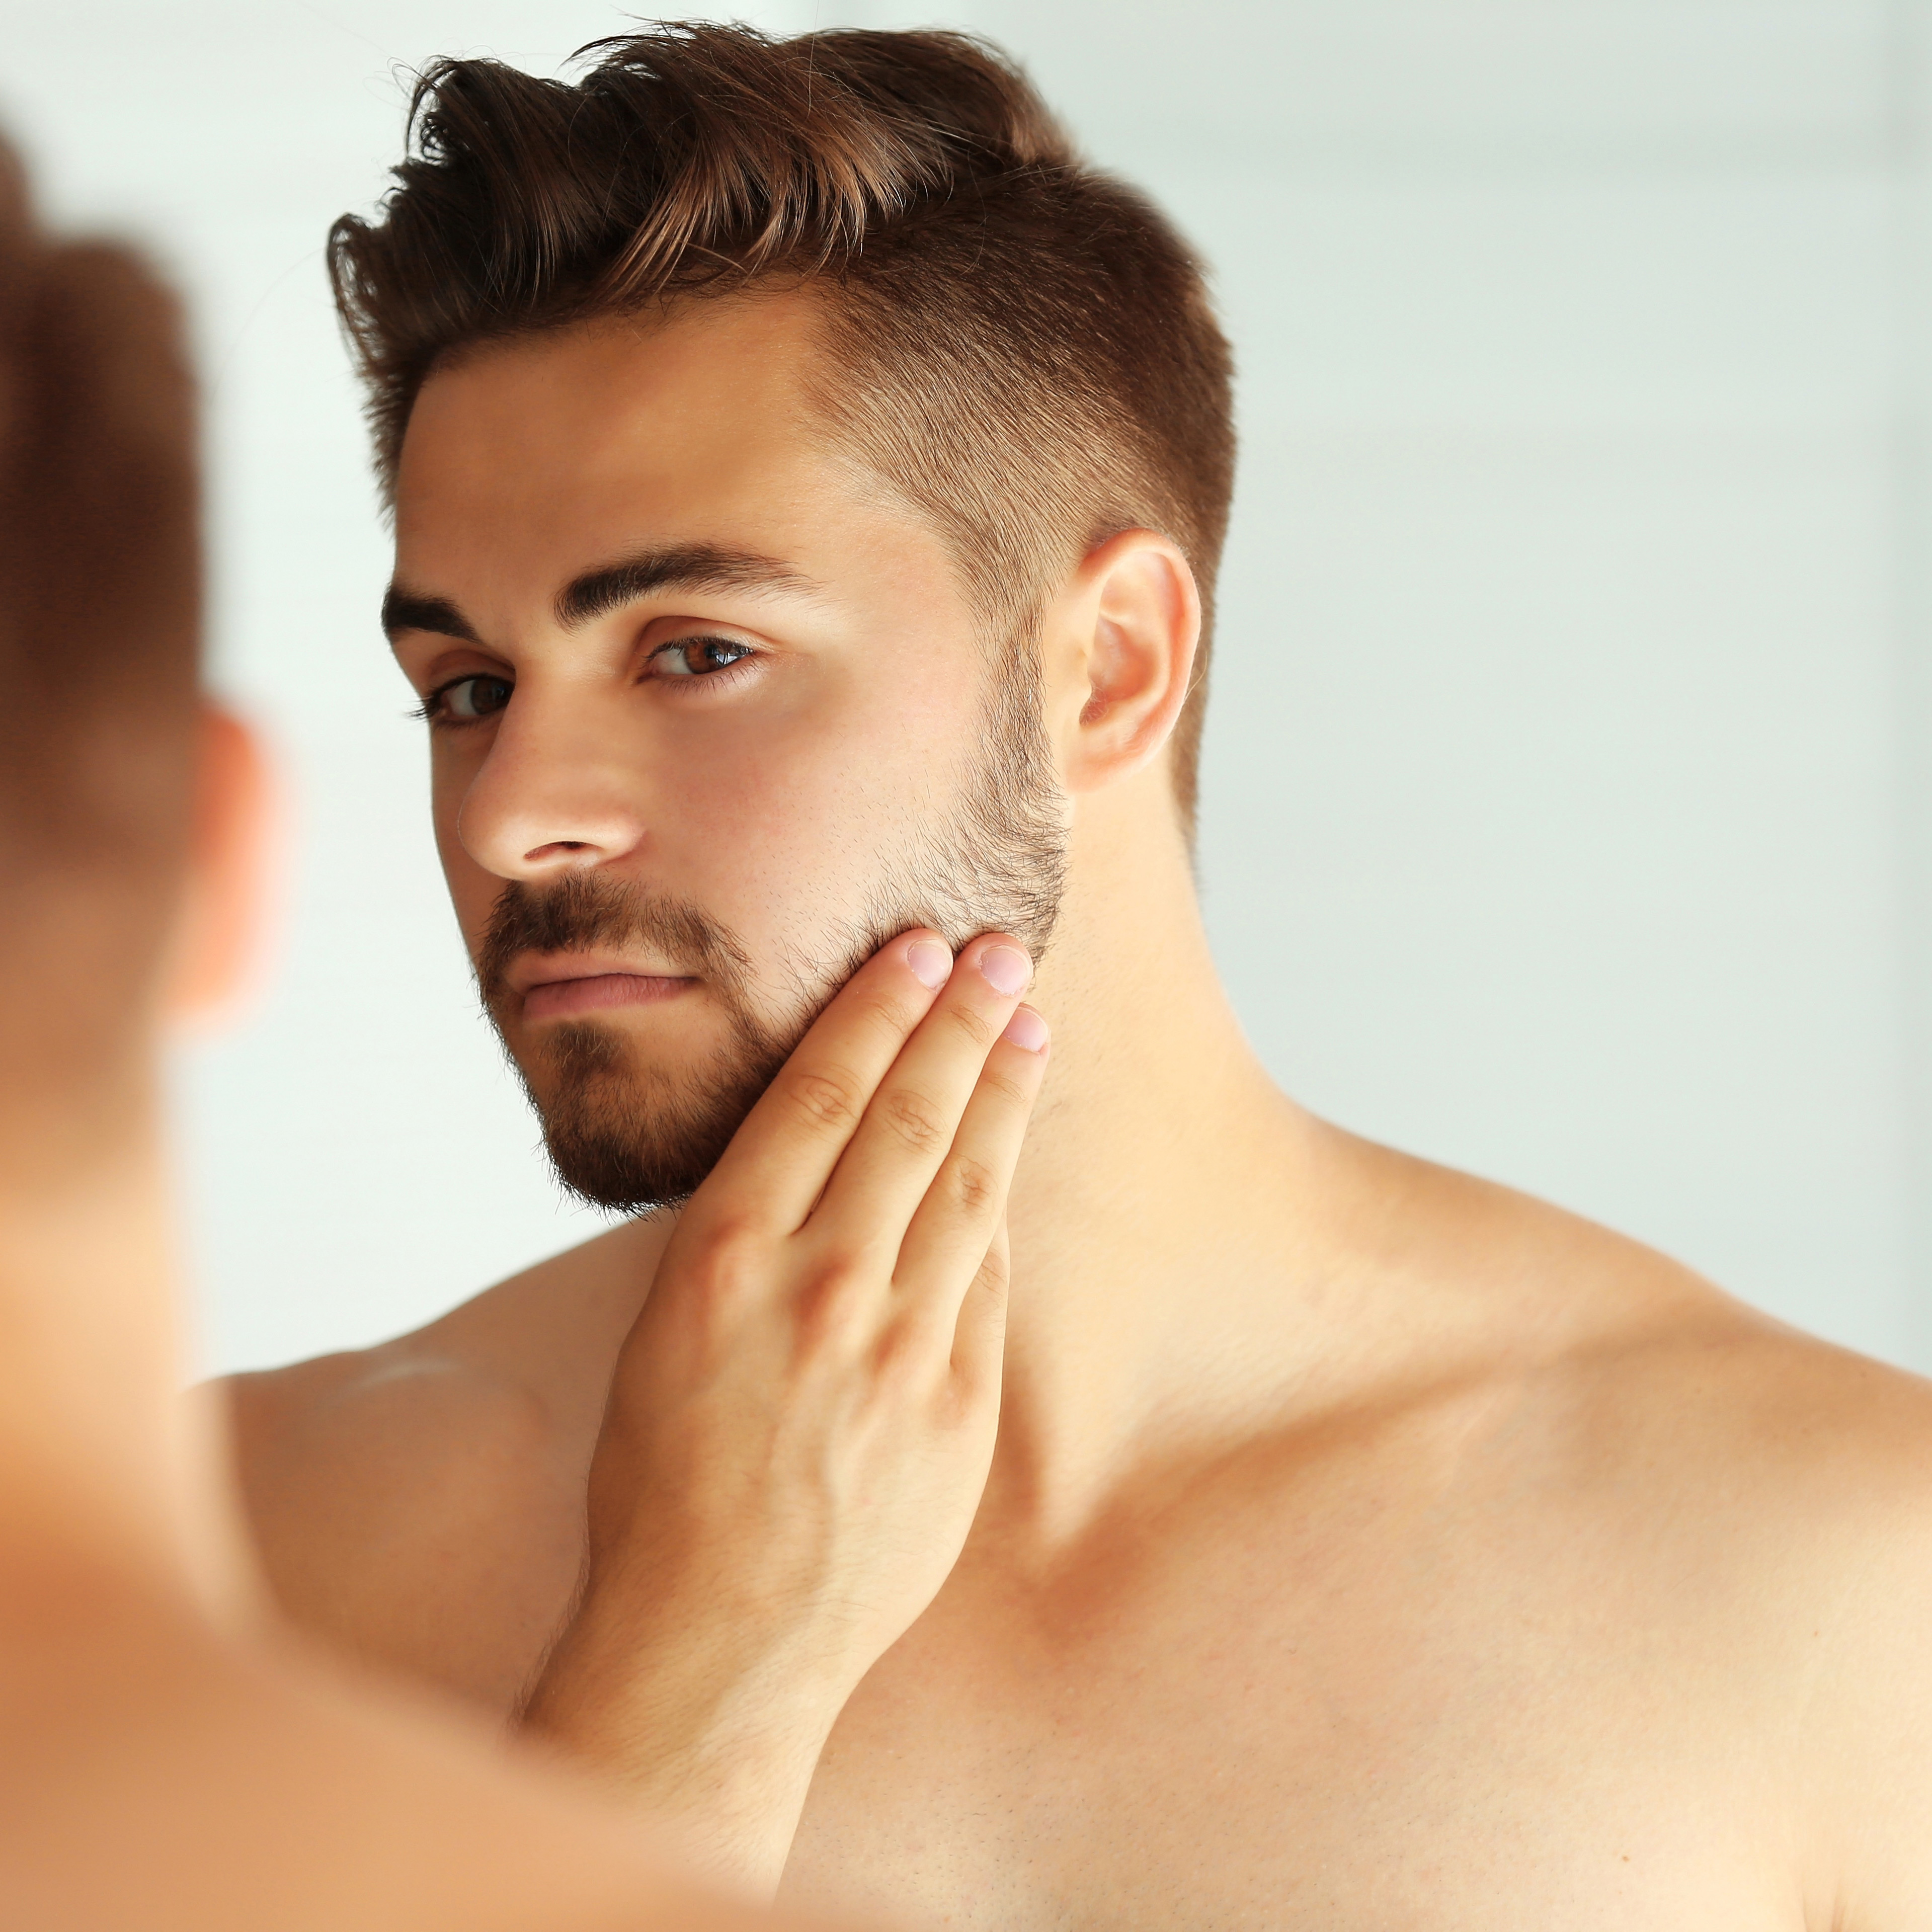 There are many treatments for the male aesthetic, including laser hair removal.